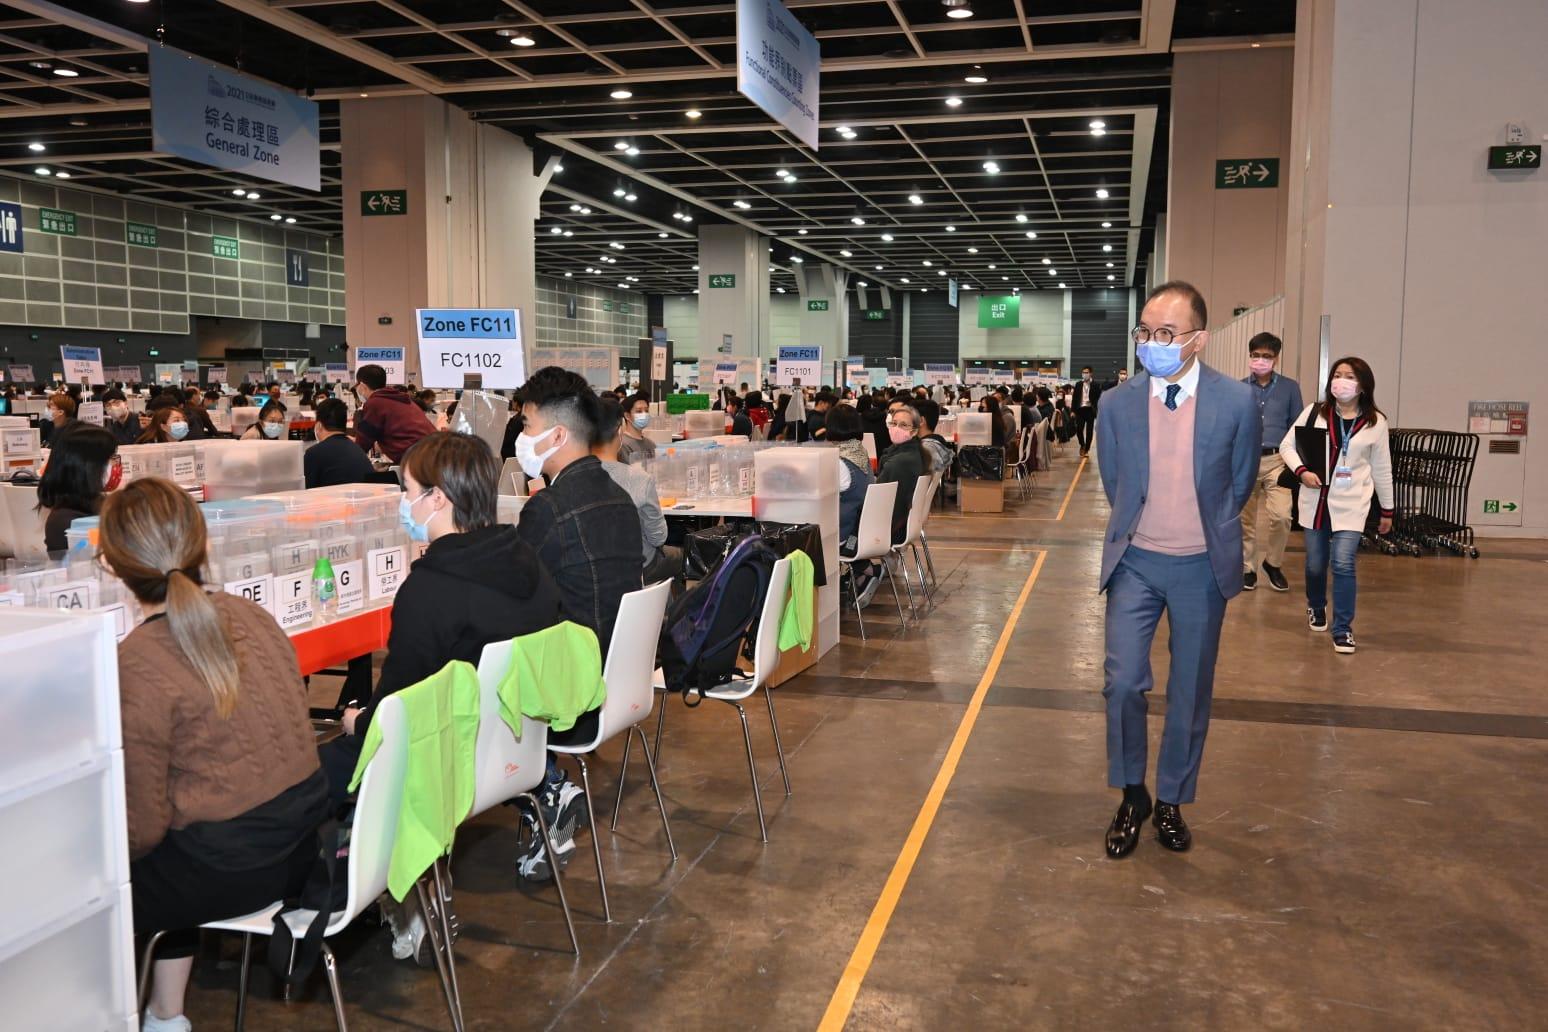 The Secretary for Constitutional and Mainland Affairs, Mr Erick Tsang Kwok-wai, today (December 18) visited the central counting station and Election Committee constituency polling station at the Hong Kong Convention and Exhibition Centre. Photo shows Mr Tsang observing the counting rehearsals by electoral staff at the central counting station.